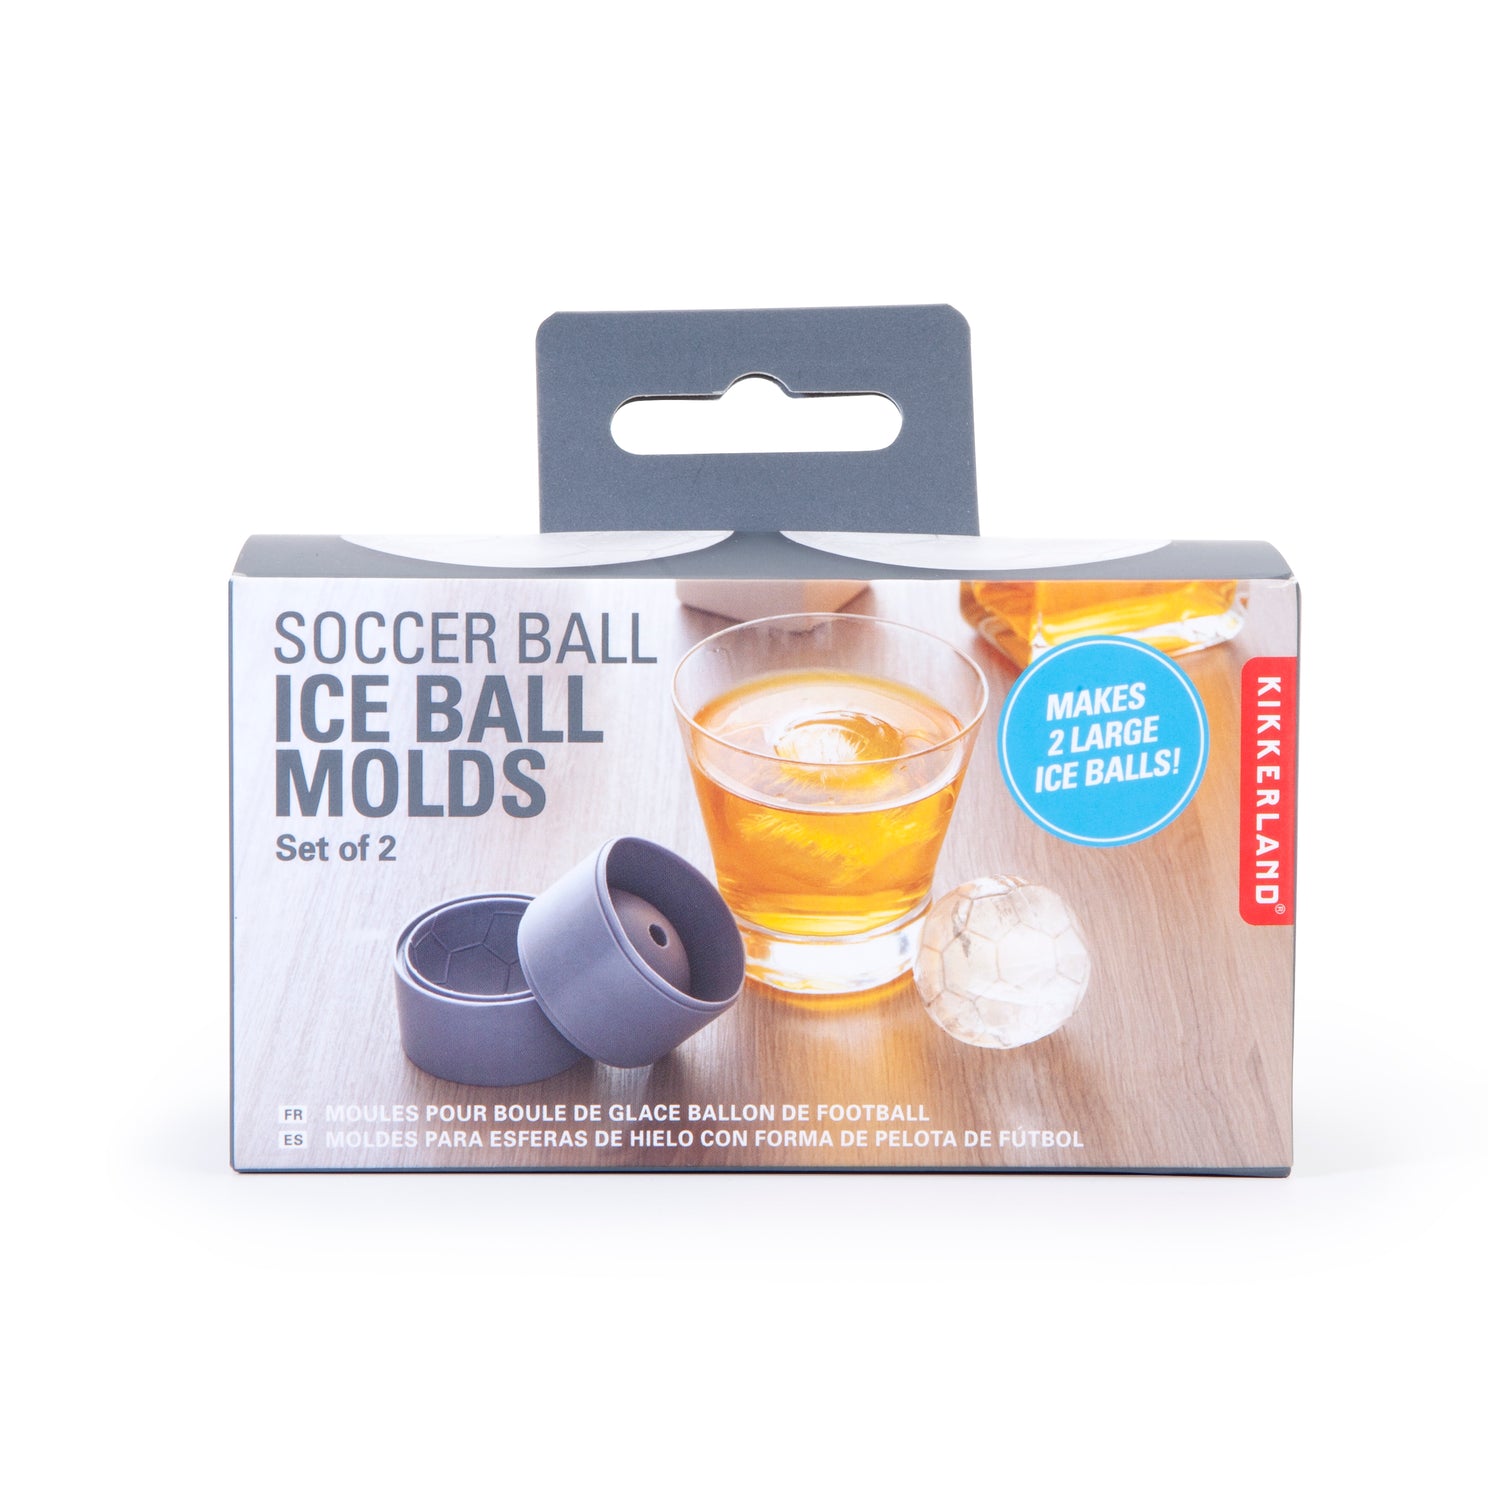 Kikkerland Clear Plastic Reusable Freezable Ice Cubes - Set of 30, Chills  Drinks Without Diluting, Washable Fake Ice Cubes for Cocktails, Wine, Beer